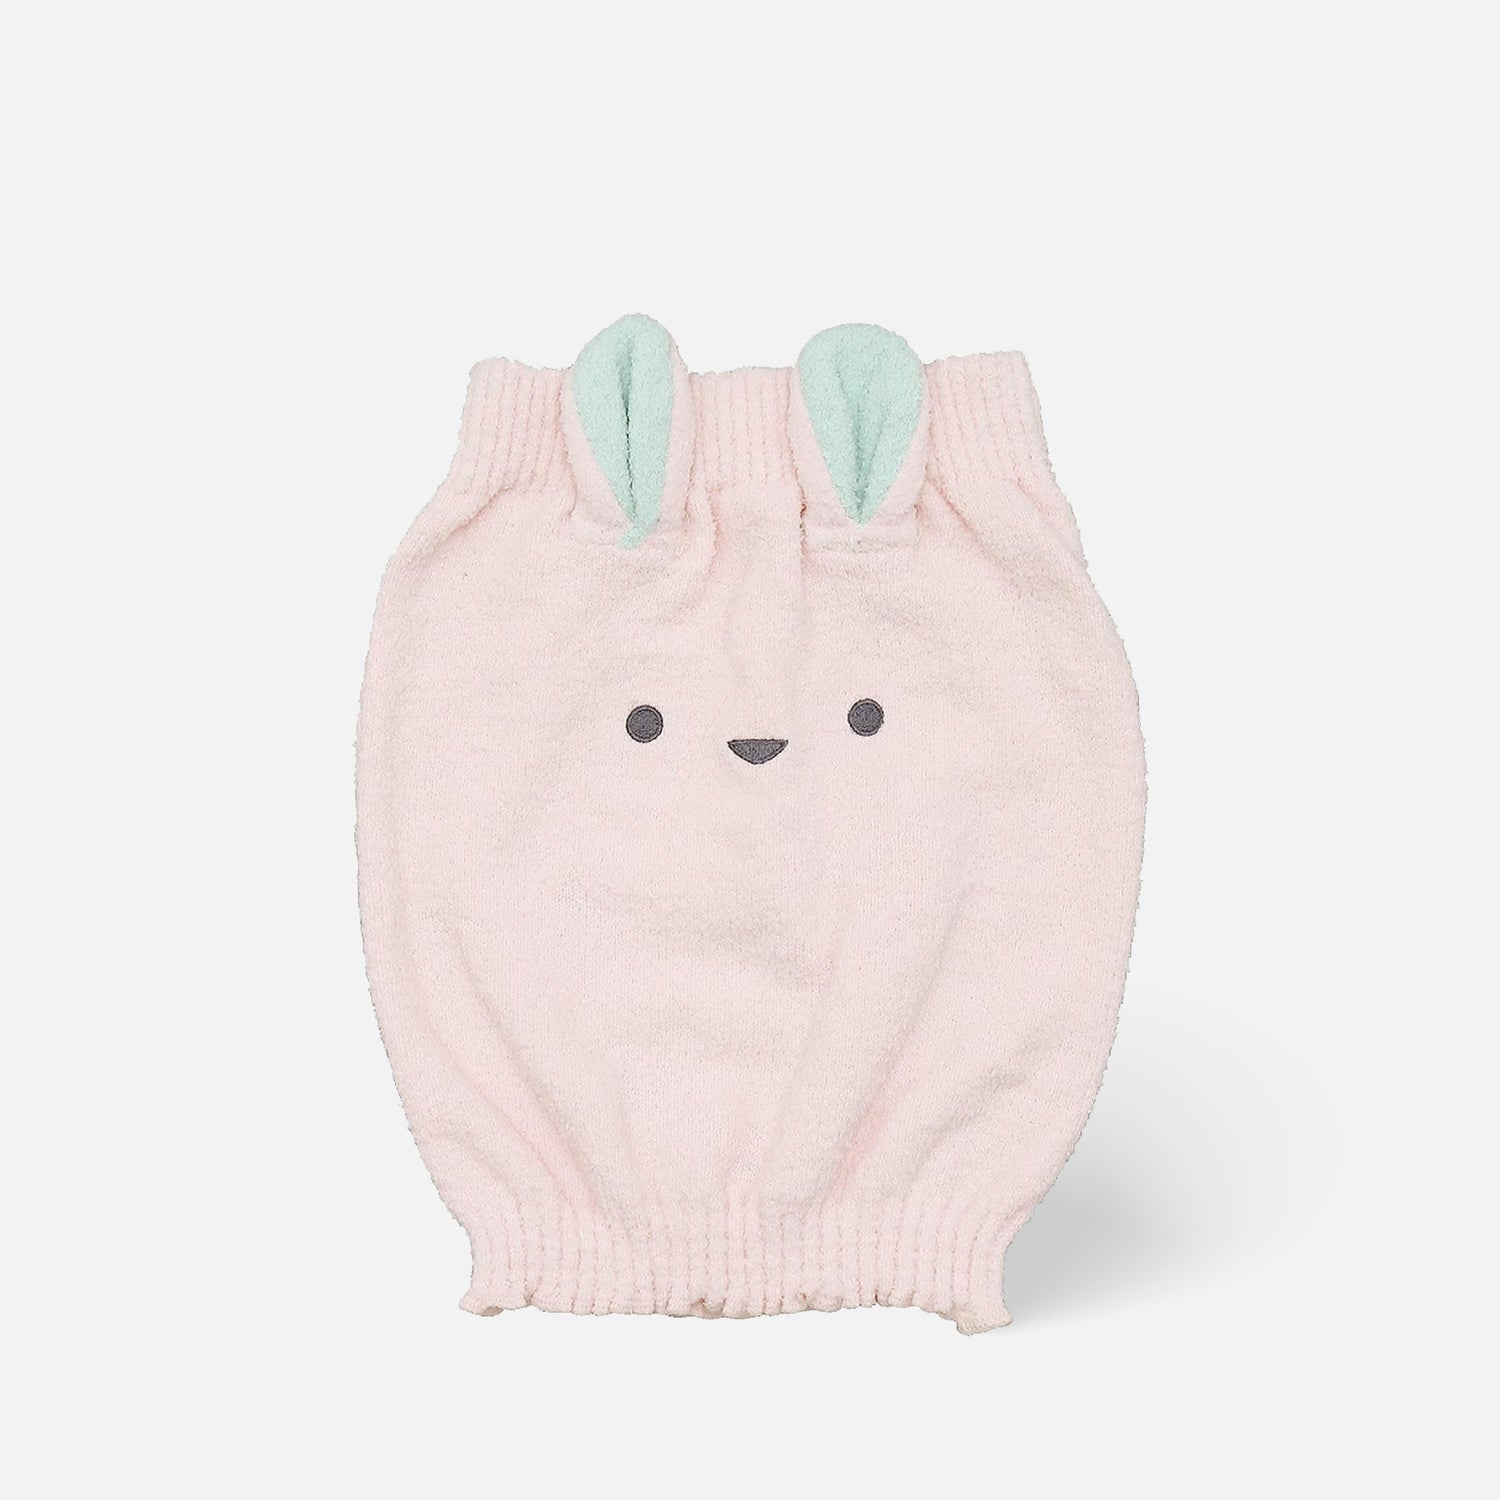 CARARI ZOOIE Fluffy Knit Microfiber Belly Wrap Bunny